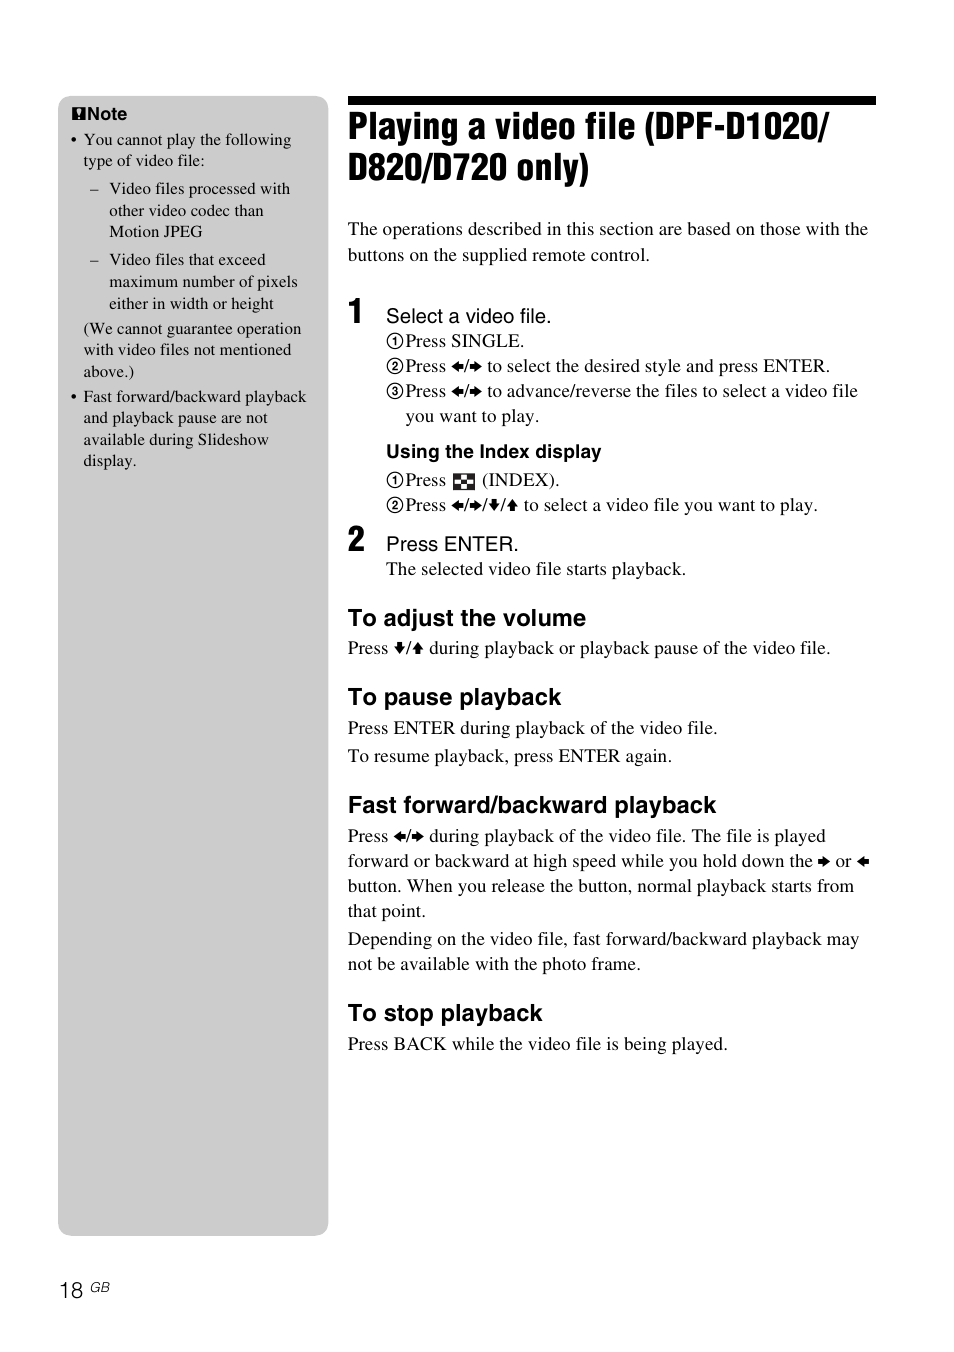 Playing a video file (dpf-d1020/d820/d720 only), Fast forward/backward playback | Sony DPF-D1020 User Manual | Page 18 / 40